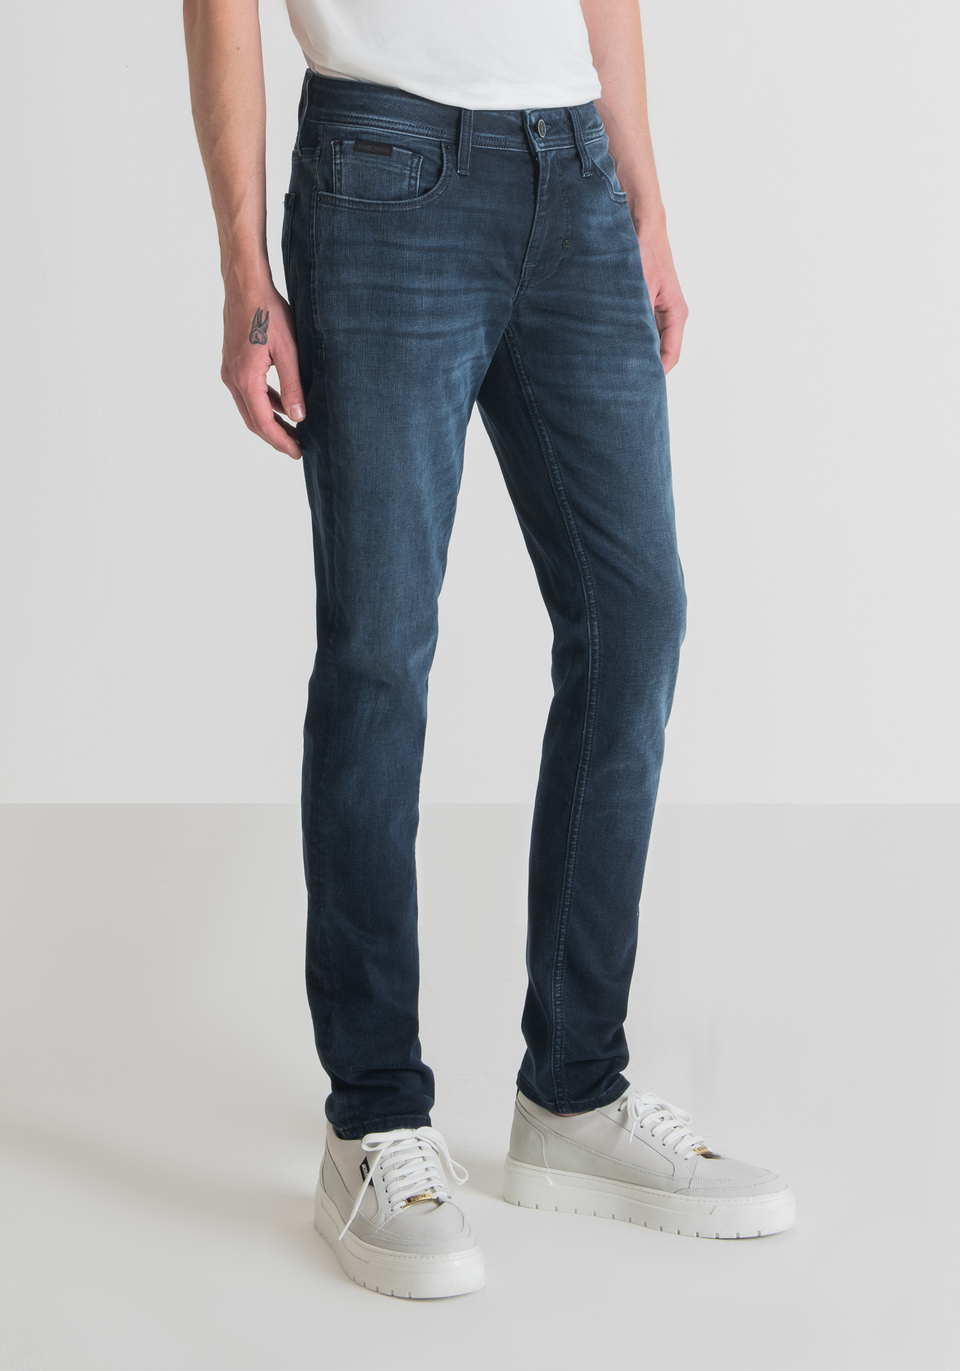 "OZZY" TAPERED FIT JEANS IN POWER STRETCH DENIM BLEND WITH DARK BLUE WASH - Antony Morato Online Shop